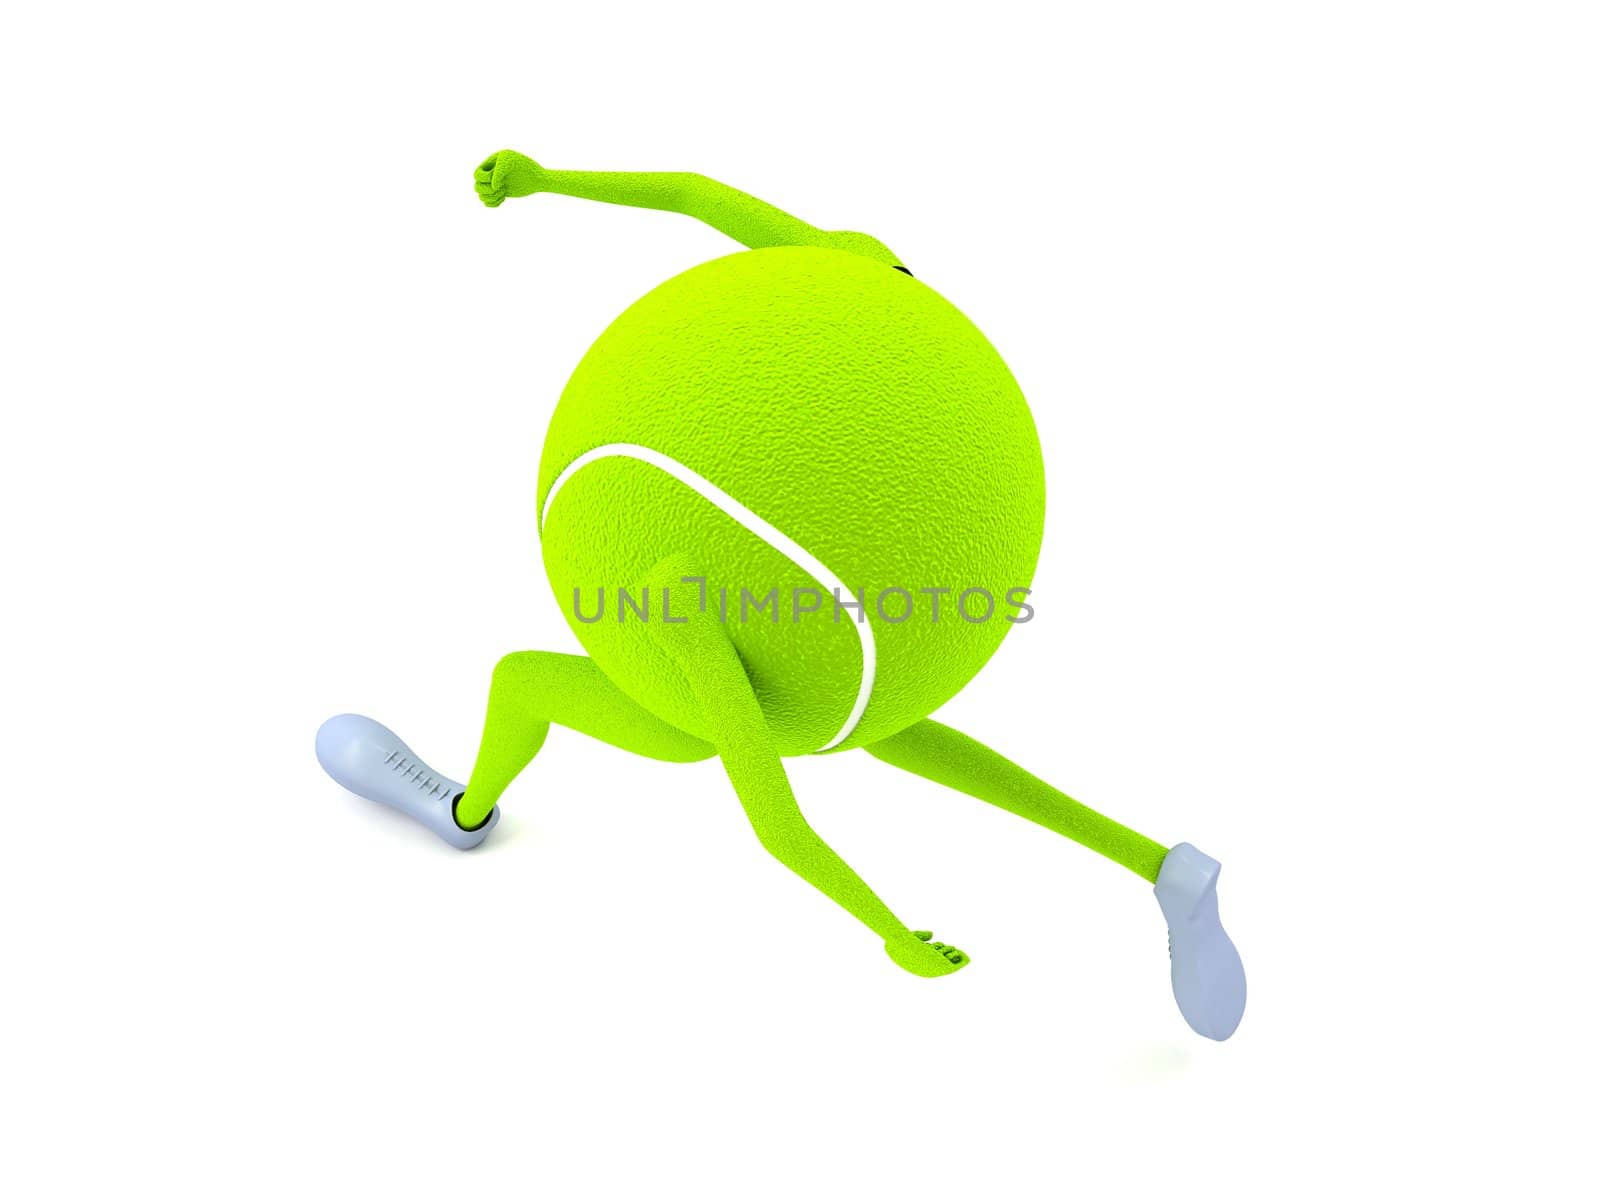 three dimensional tennis ball with hands and legs by imagerymajestic